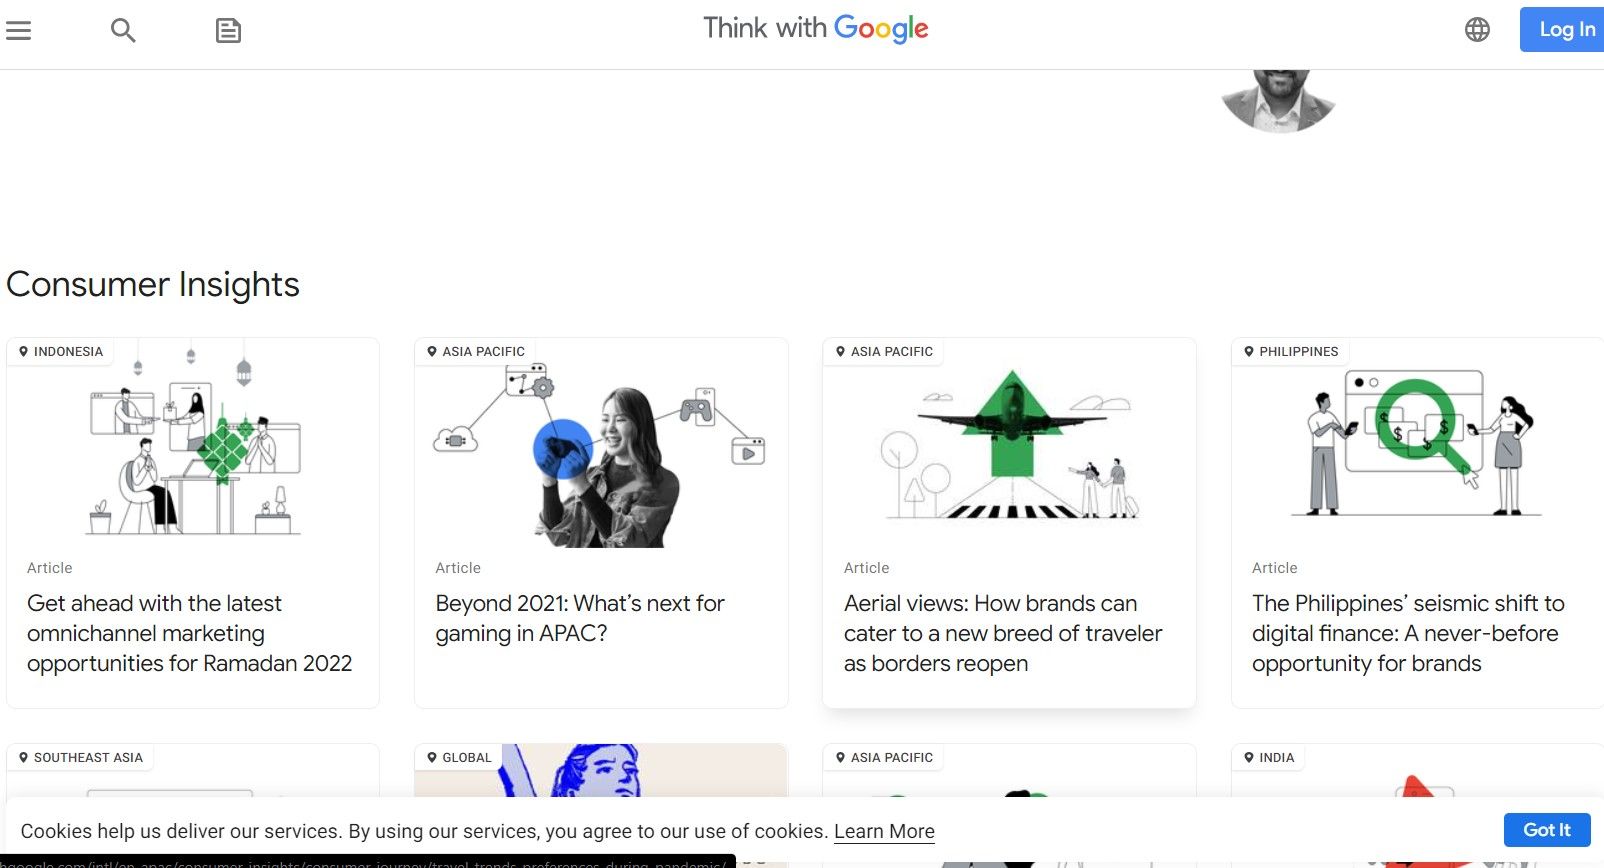 Think with Google consumer insights page